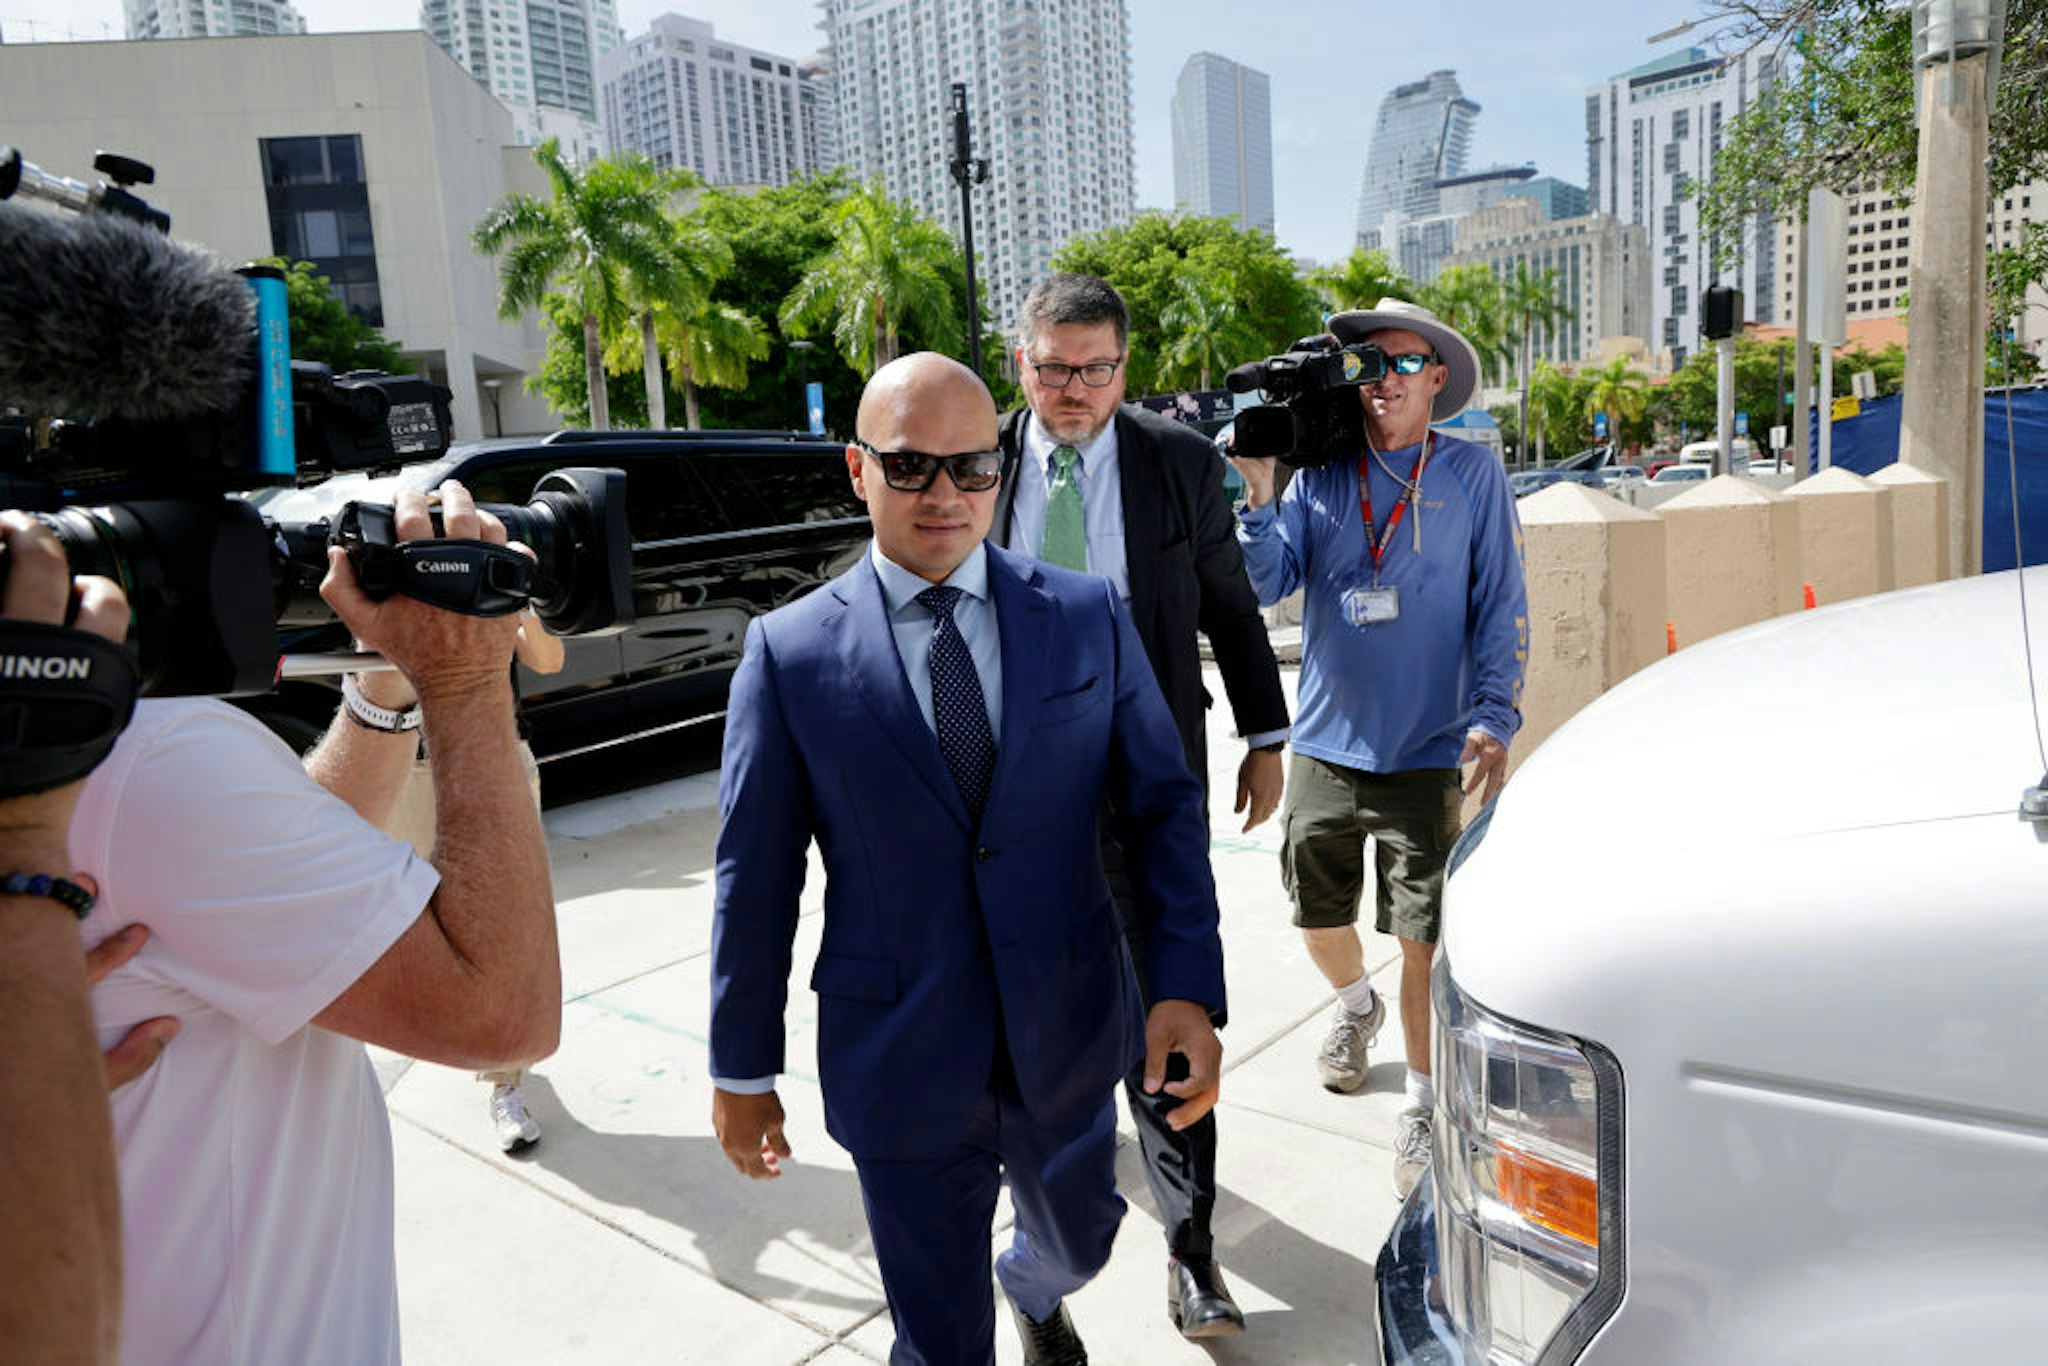 MIAMI, FLORIDA - JULY 6: Walt Nauta, valet to former U.S. President Donald Trump and a co-defendant in federal charges filed against Trump, arrives with Lawyer, Stanley Woodward, at the James Lawrence King Federal Justice Building on July 6, 2023 in Miami, Florida. The arraignment for Walt Nauta, charged alongside former President Donald Trump for allegedly mishandling classified documents, was postponed and rescheduled for July 6. It was postponed due to Nauta's inability to find a Florida-based attorney and being stuck in Newark, NJ, after his flight was canceled.